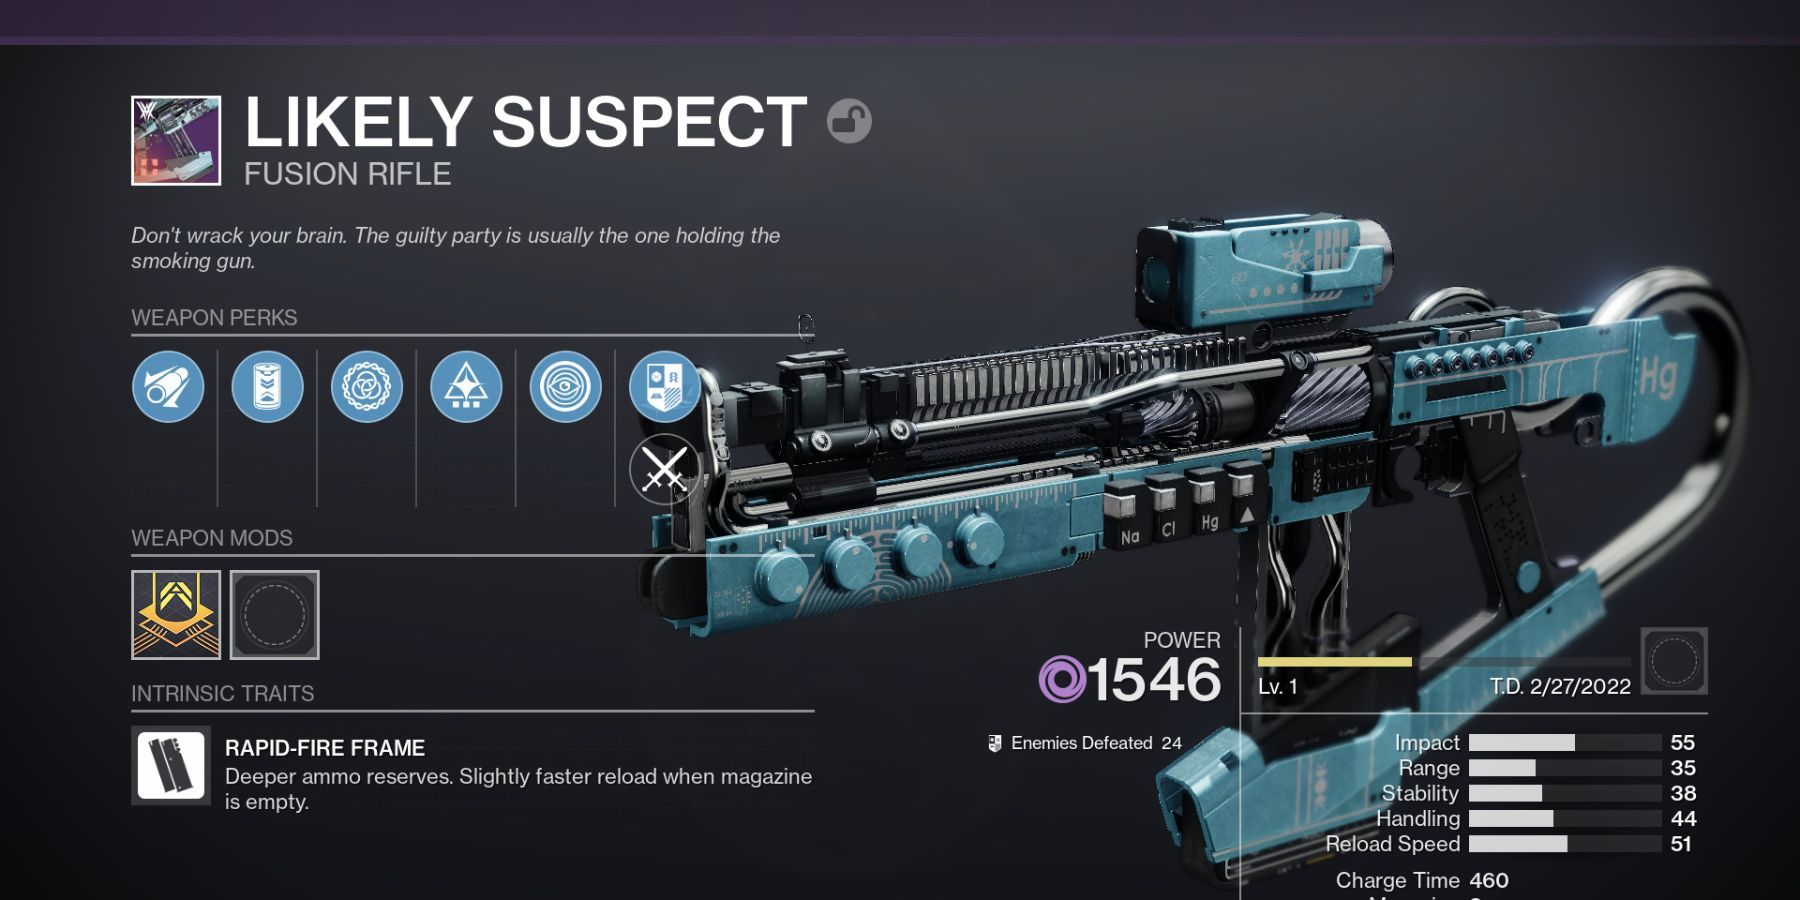 Destiny 2 Likely Suspect Fusion Rifle